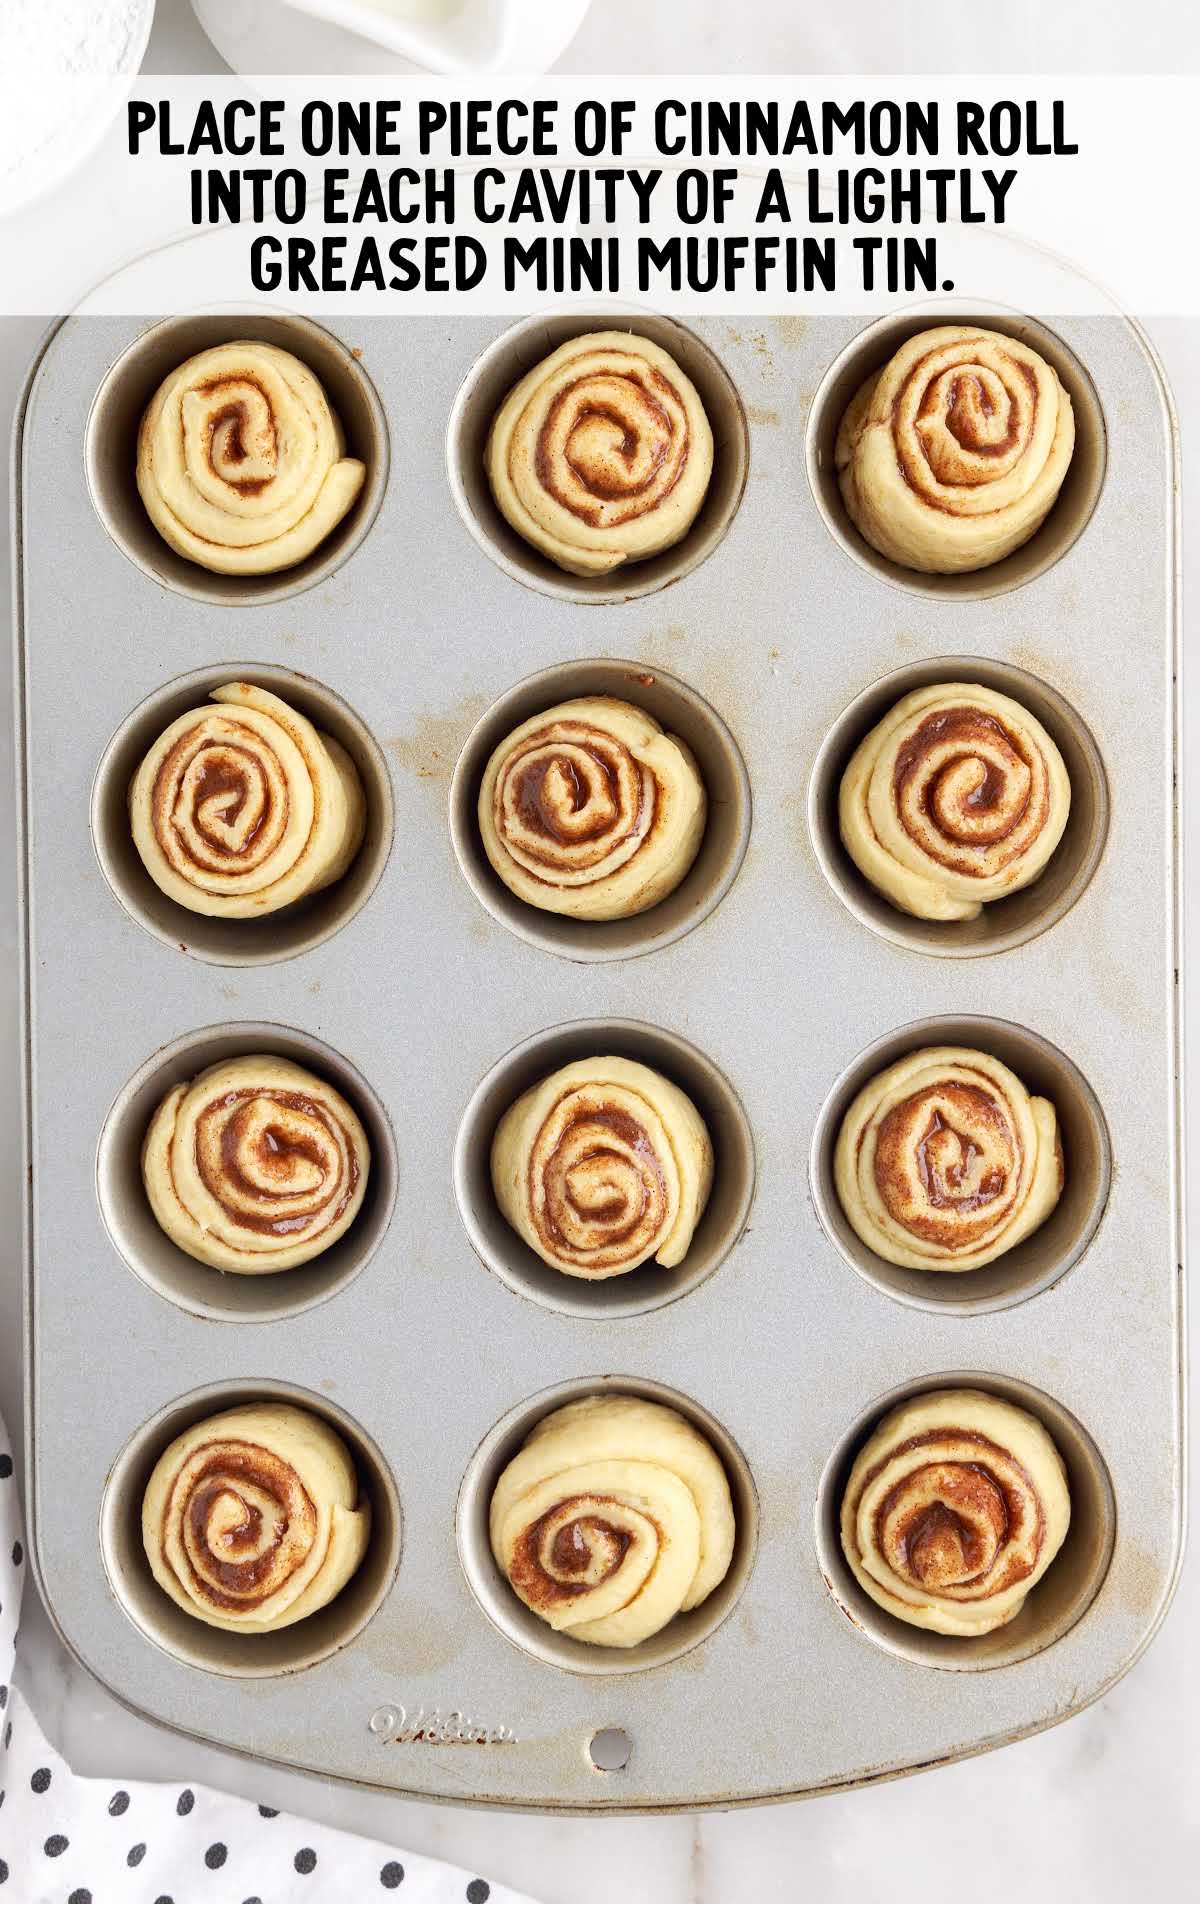 cinnamon roll pieces placed in to each cavity in a muffin pan